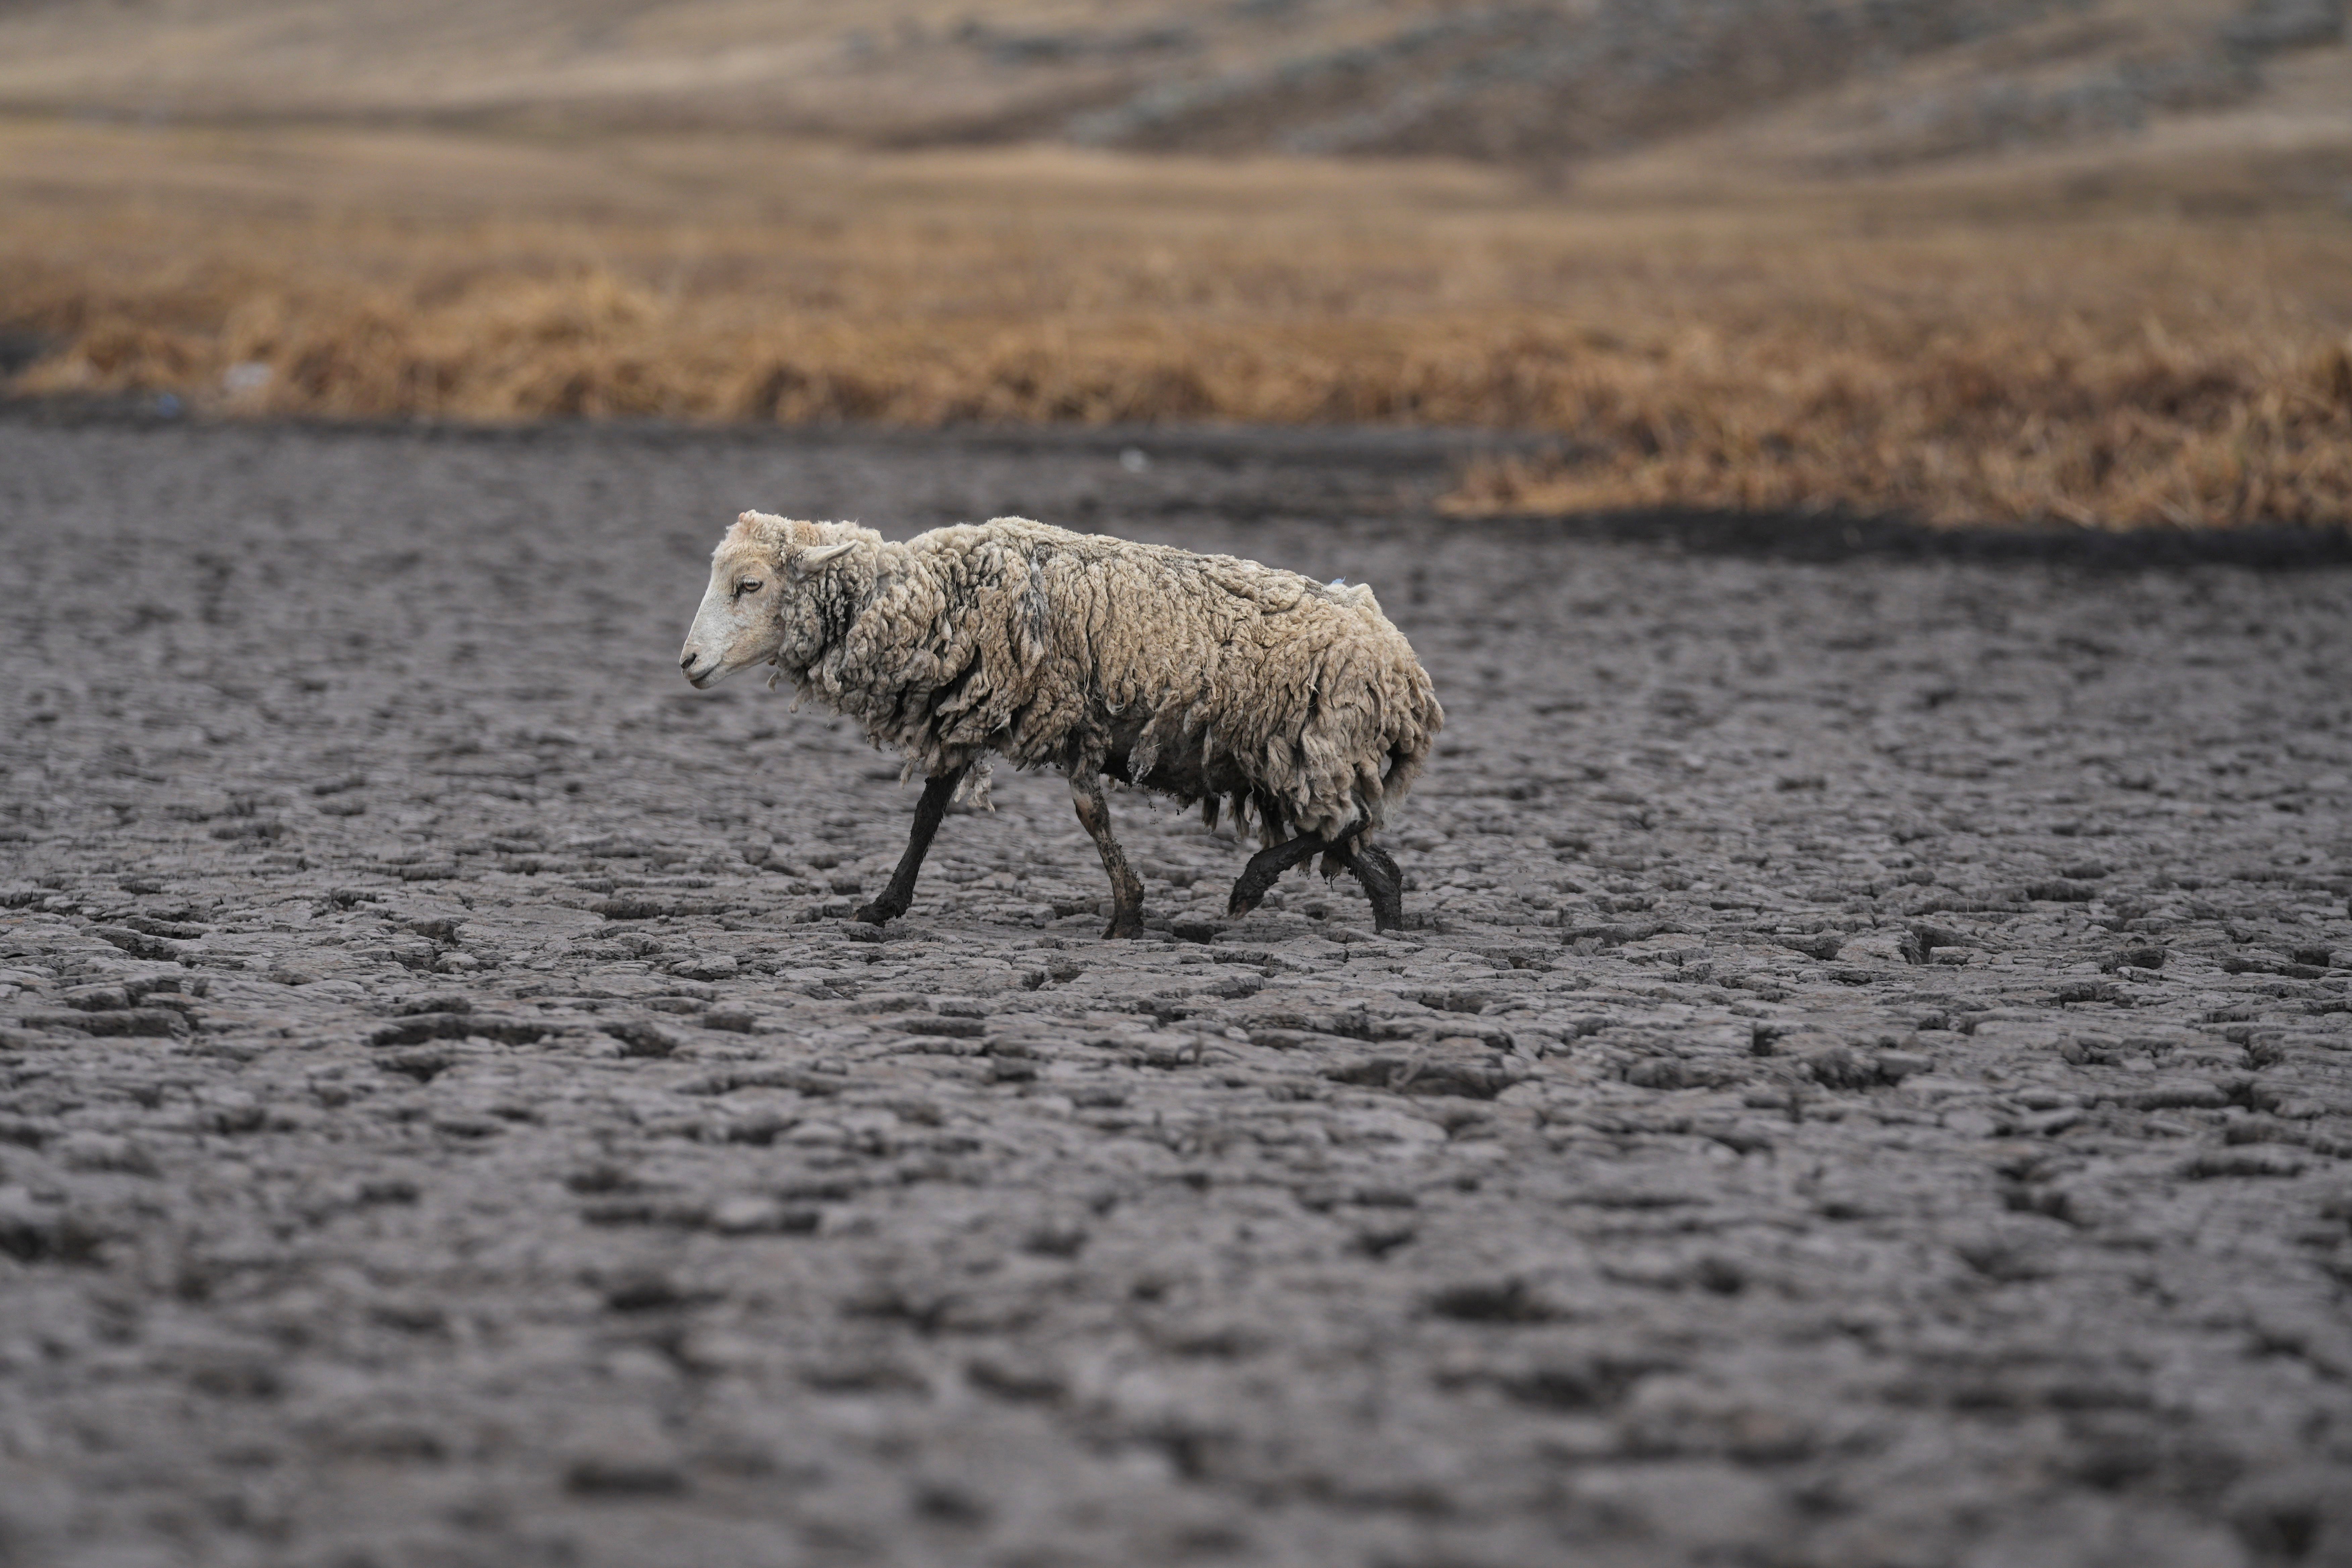 An emaciated sheep walks on the dry bed of the Cconchaccota lagoon in the Apurimac region of Peru, Friday, Nov. 25, 2022. (Photo: Guadalupe Pardo, AP)